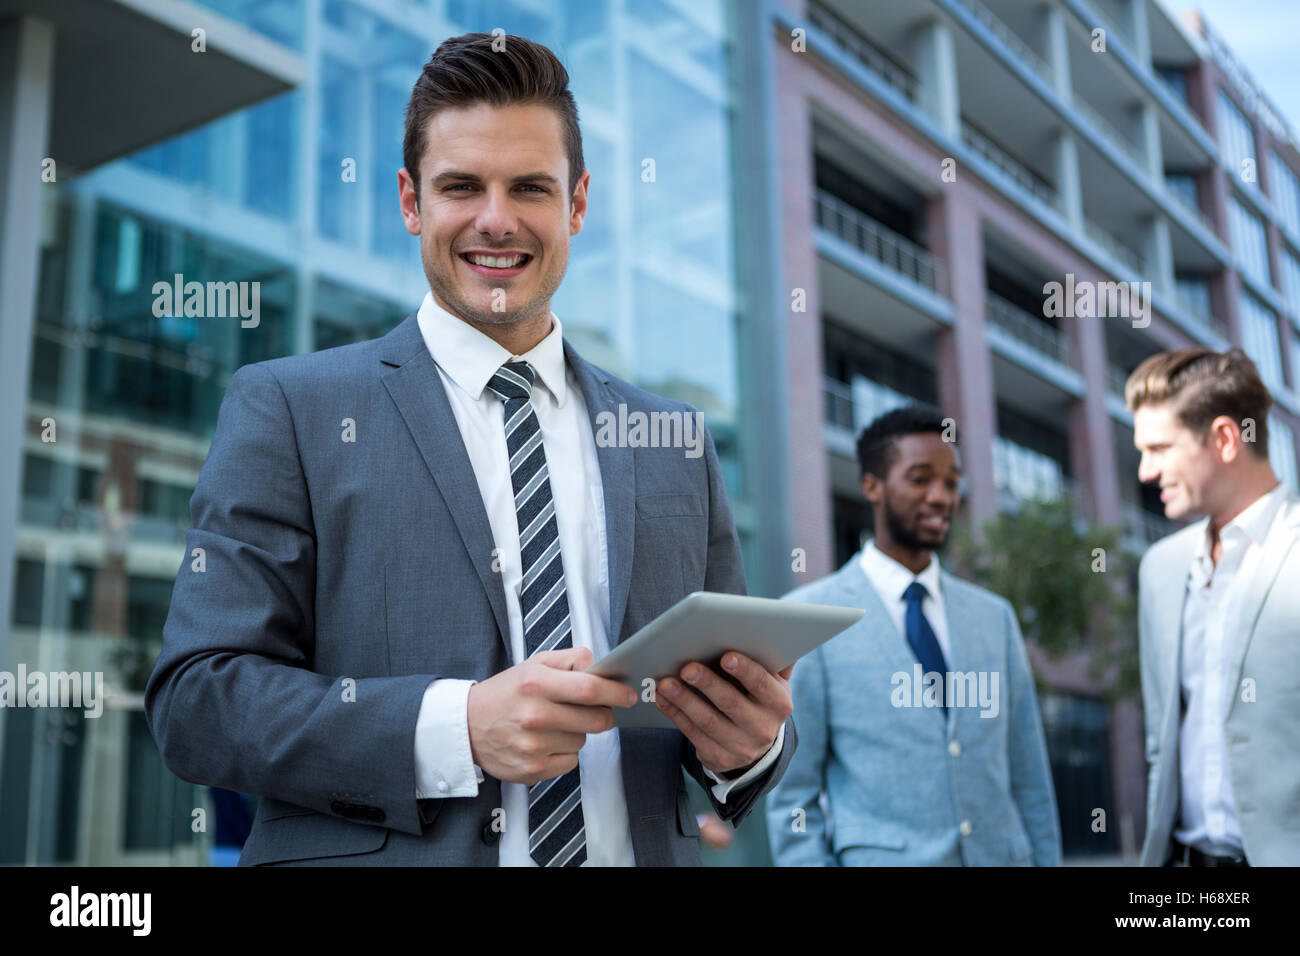 Smiling businessman using digital tablet in the office building Stock Photo